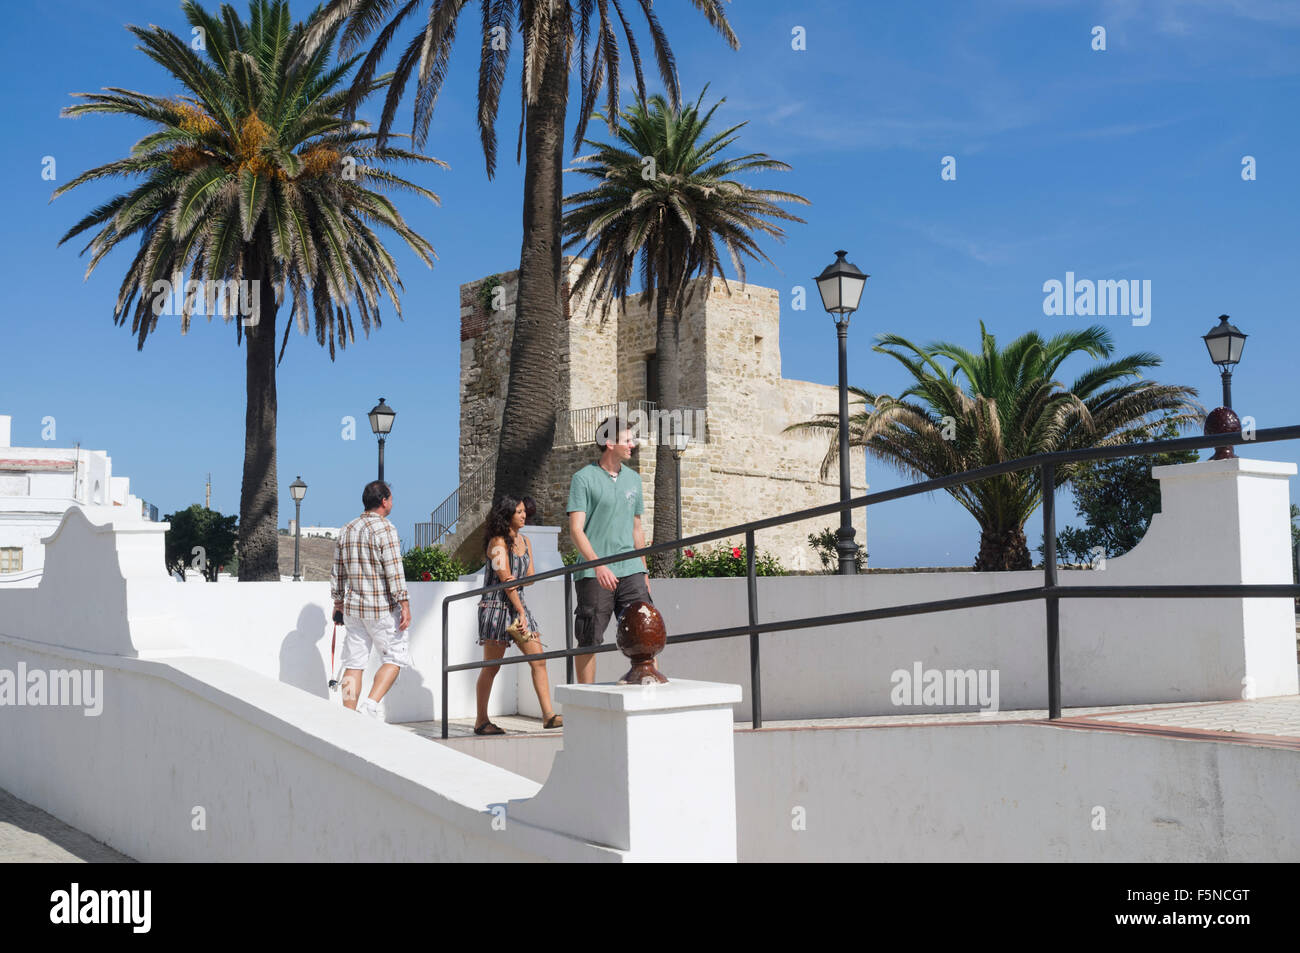 Miramar tower and gardens in Tarifa old town, Cadiz province, Andalusia, Spain Stock Photo